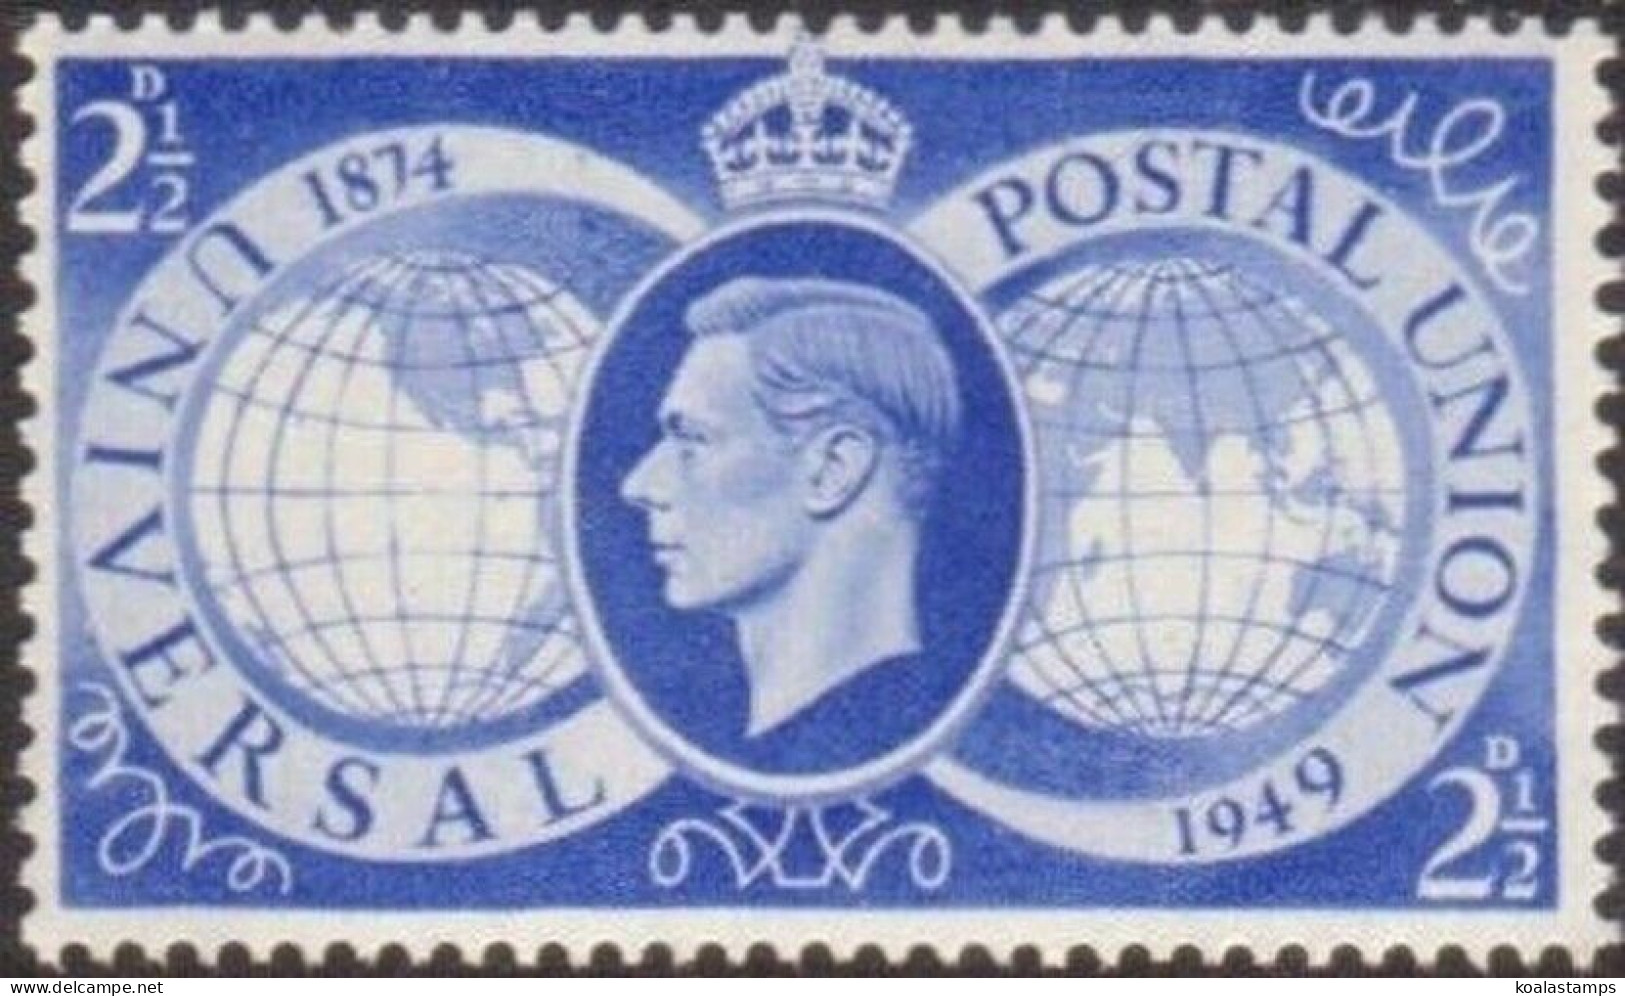 Great Britain 1949 SG499 2½d Universal Postal Union MNH - Unclassified